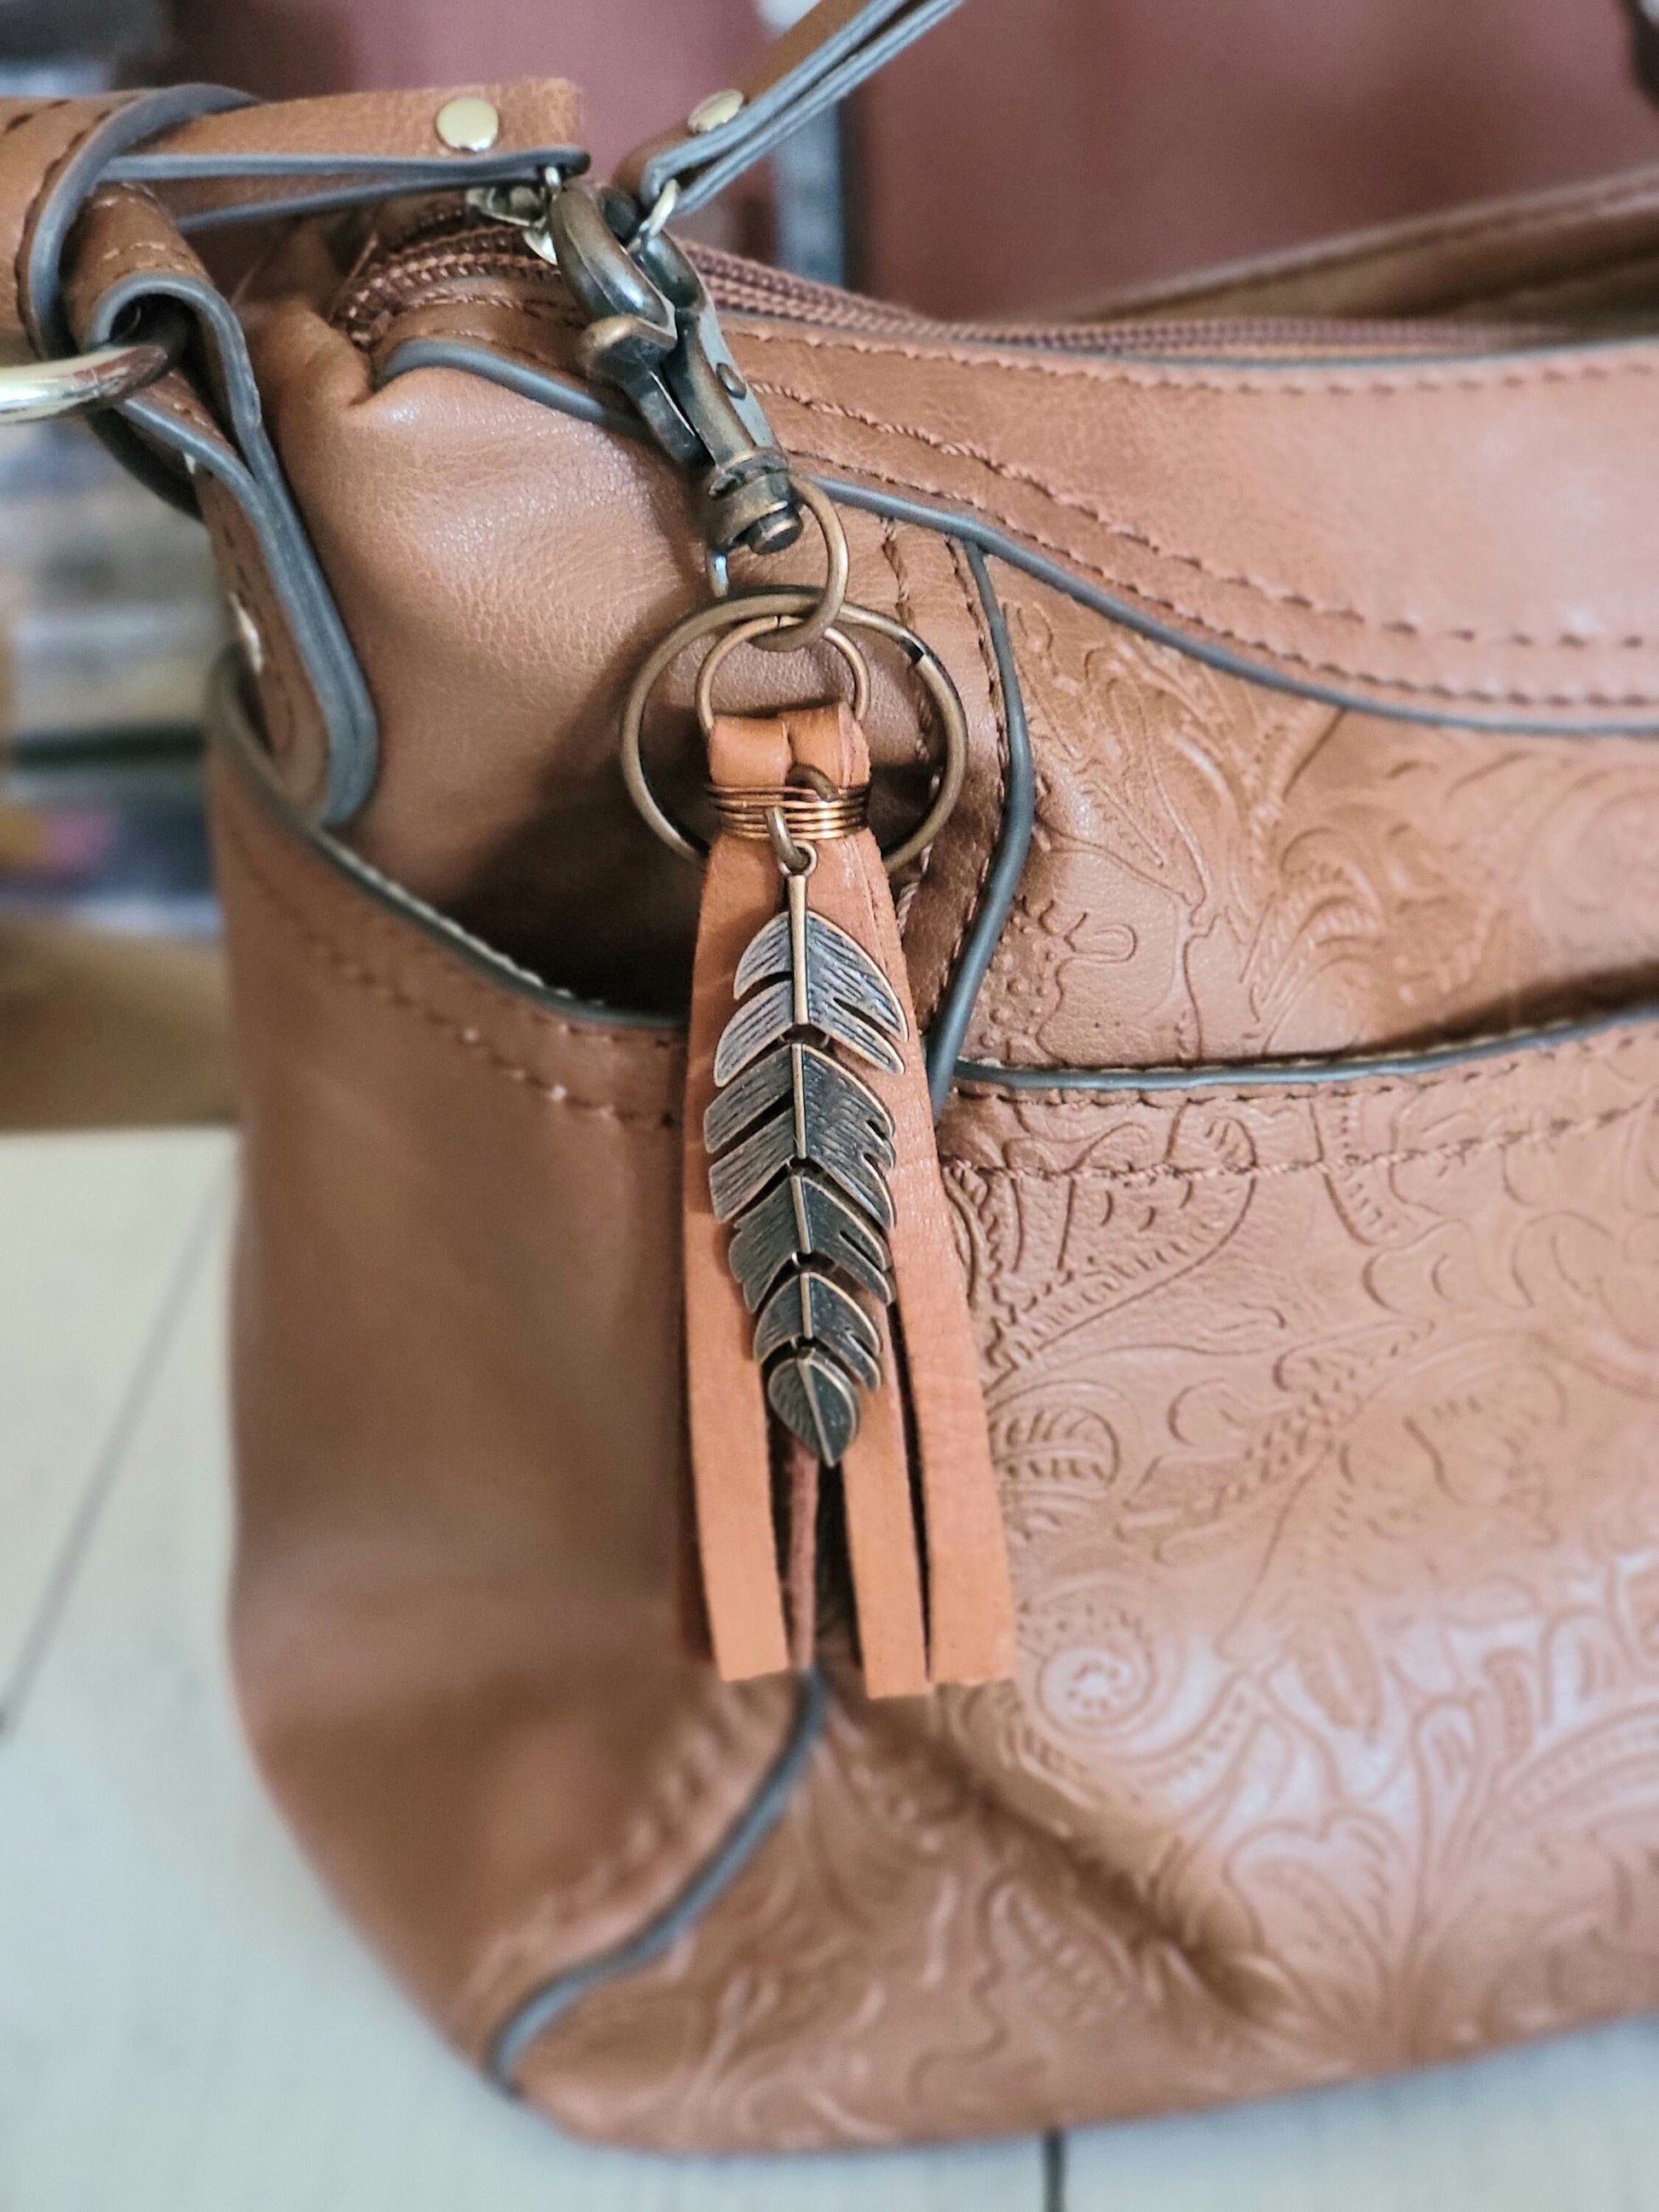 Feather Bag Charm - Silver 